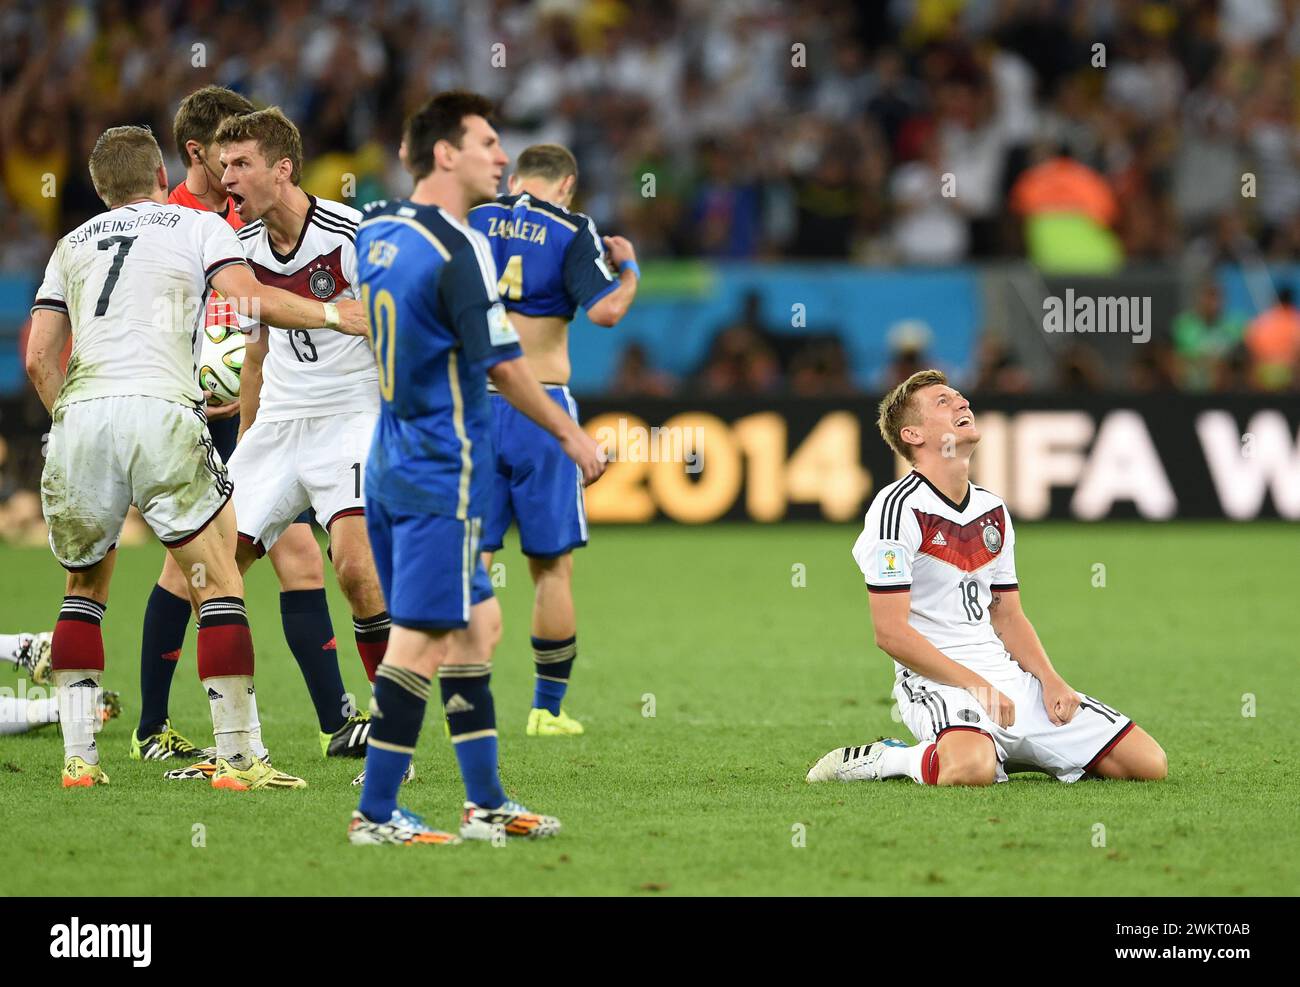 Rio De Janeiro, Brazil. 13th July, 2014. Soccer: World Cup 2014, Final, Argentina - Germany. Germany's Toni Kroos (r) kneels on the pitch after the World Cup victory. Around three years after his retirement, Toni Kroos will be back in action for the German national soccer team. Following a request from national coach Nagelsmann, he will 'play for Germany again from March', the 34-year-old Real Madrid midfielder announced on Instagram. Credit: dpa/Alamy Live News Stock Photo